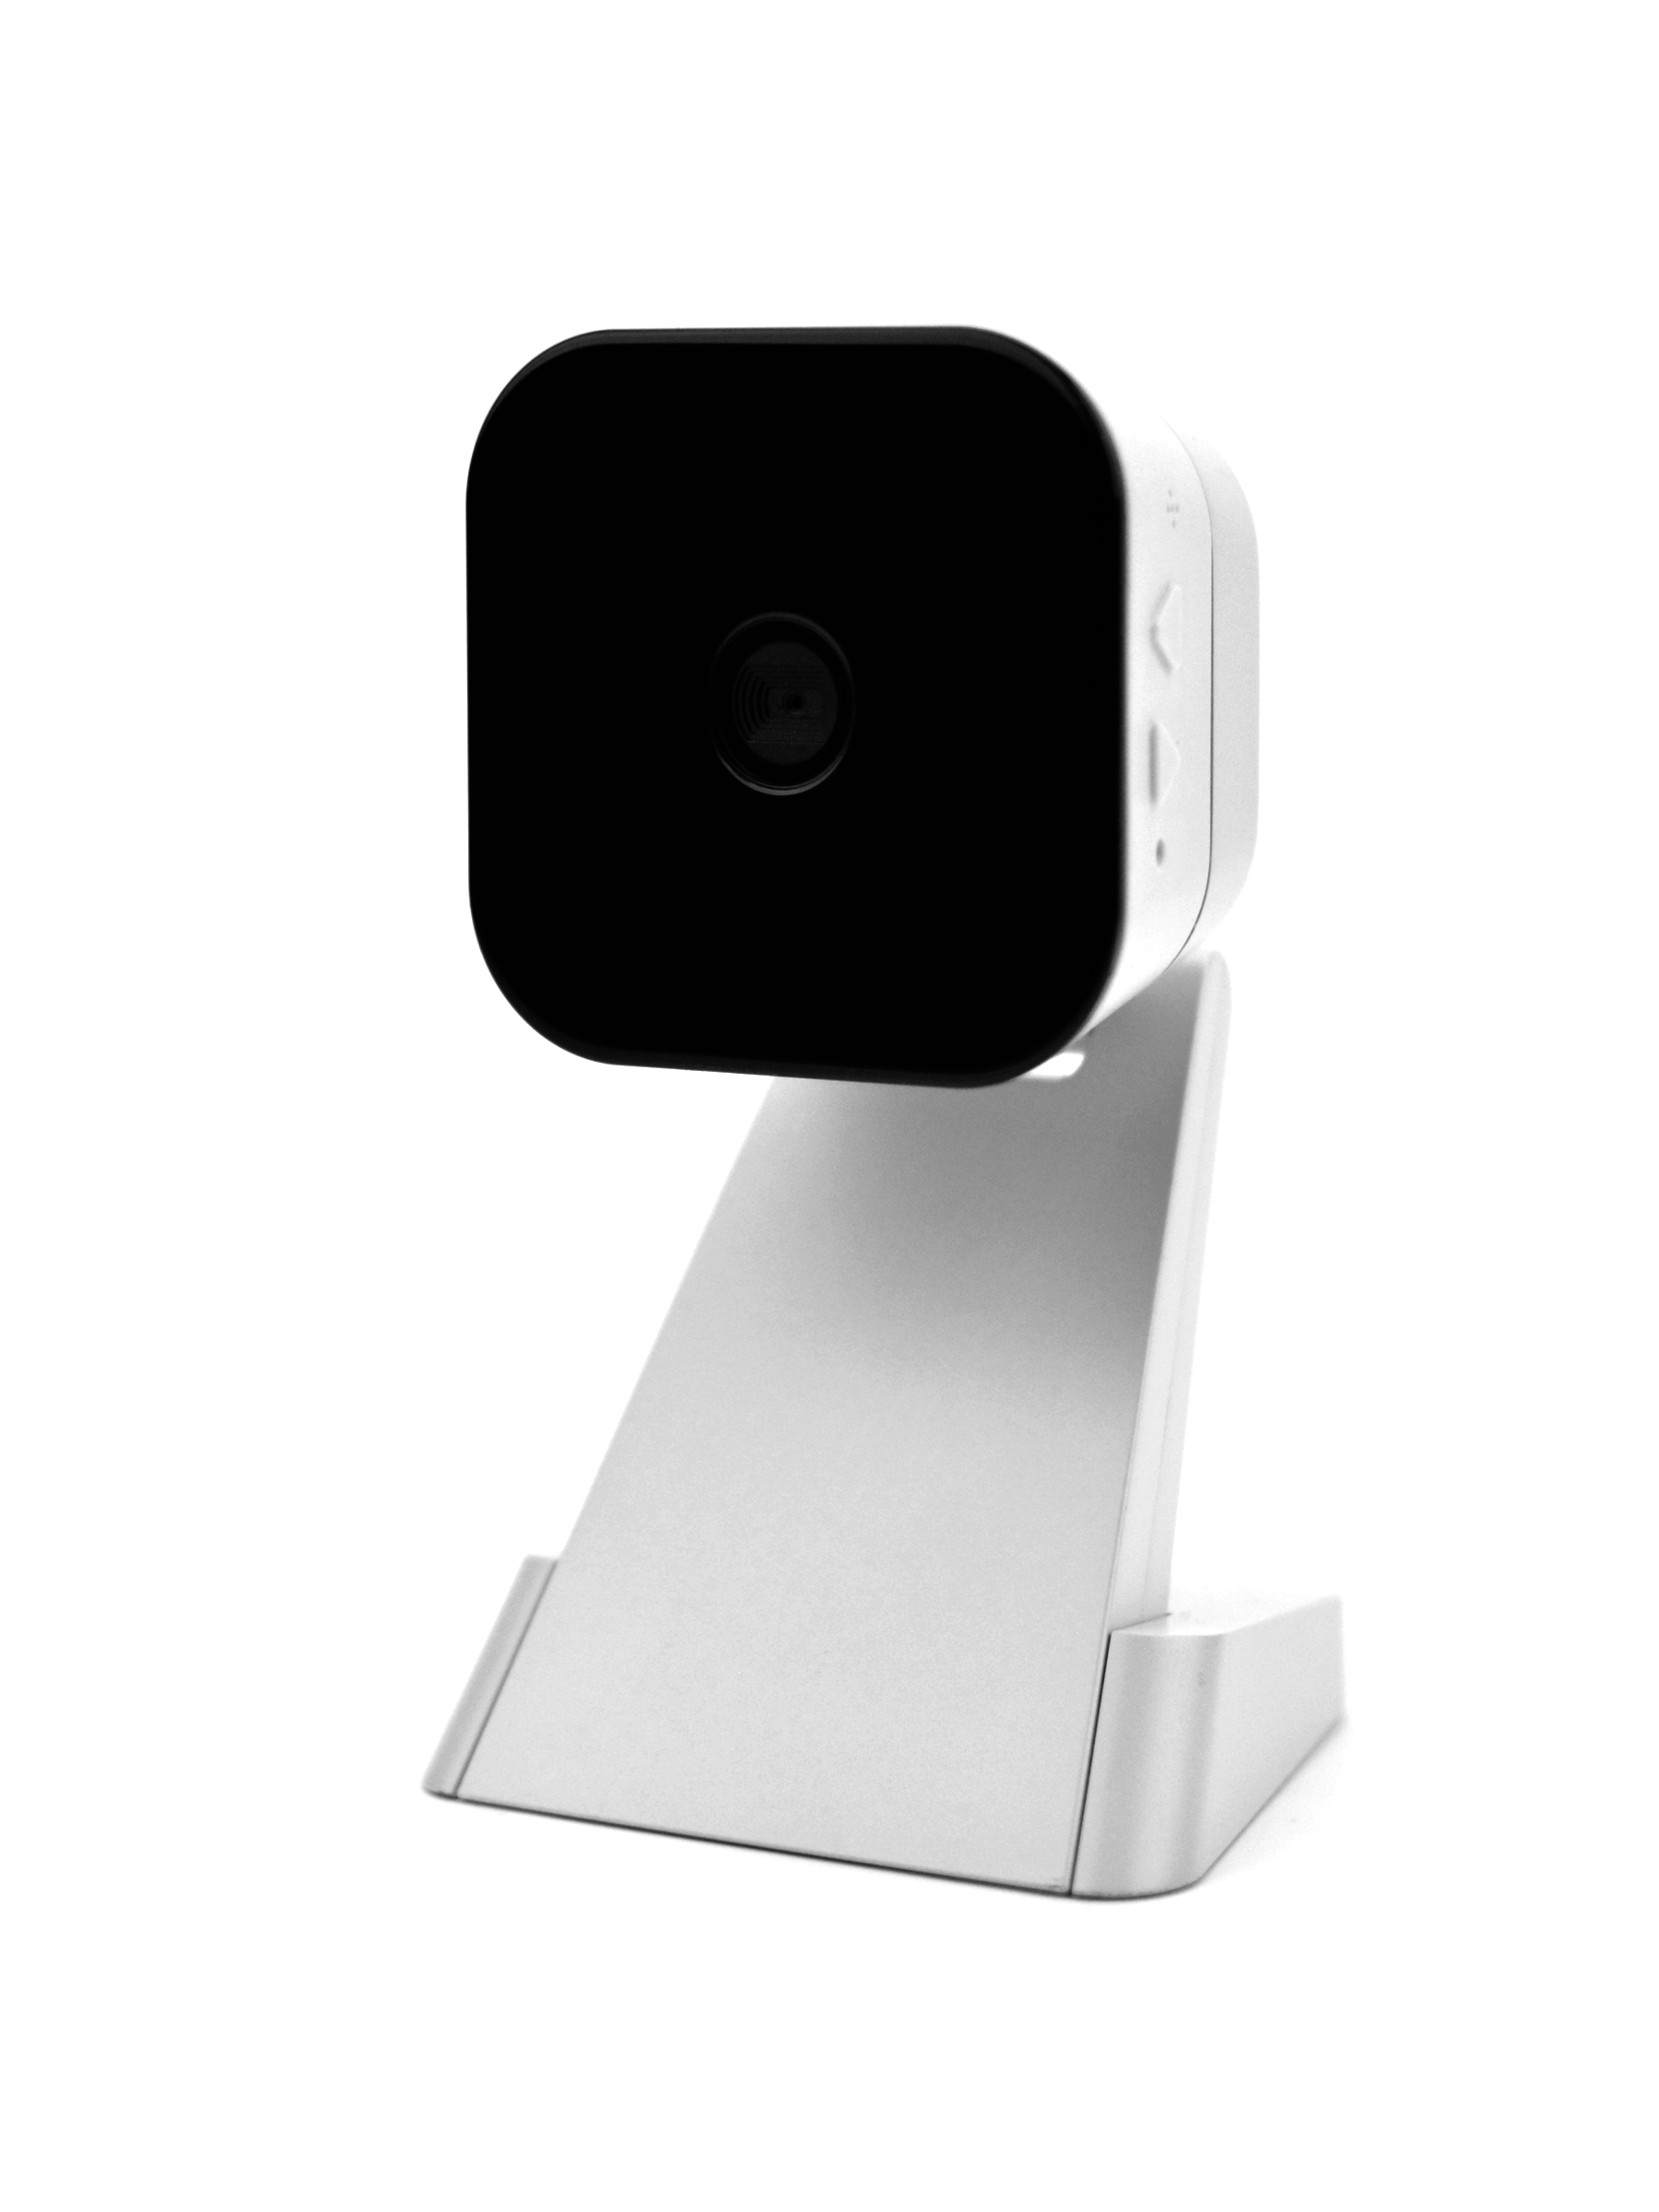 IP Camera Systems for complete IP security solution